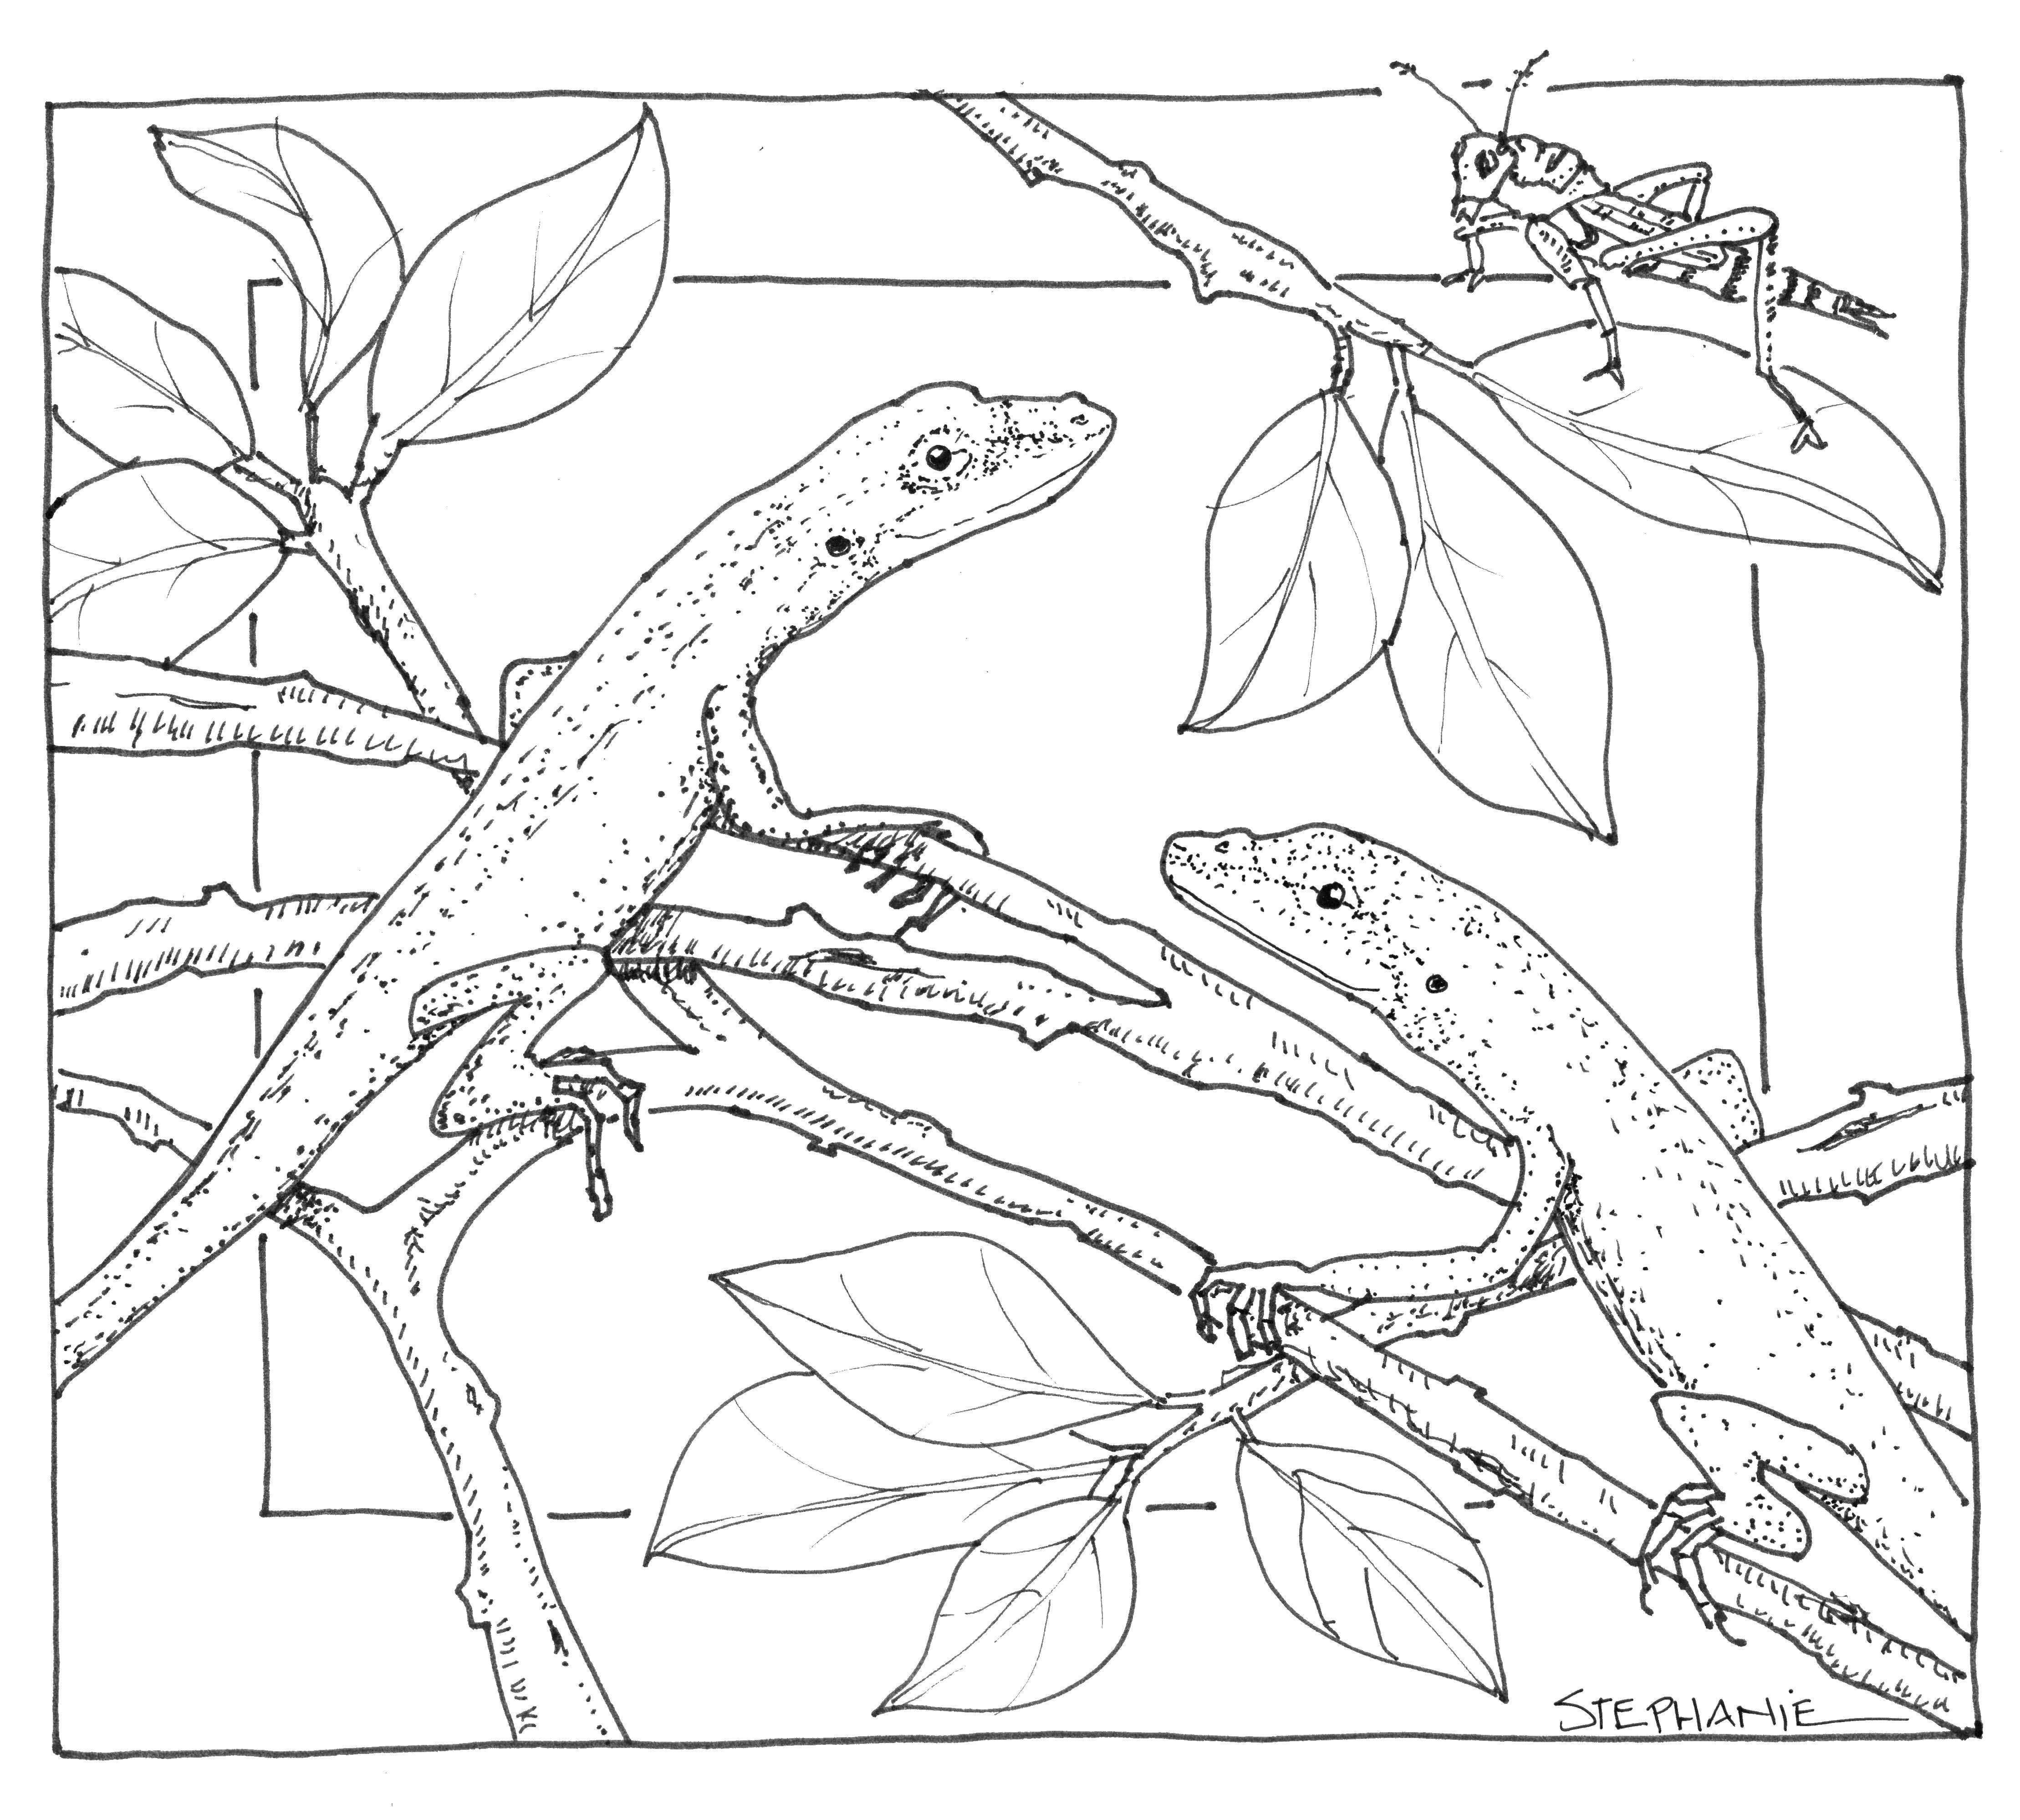 Coloring Lizards. Category Nature. Tags:  nature, reptiles, lizards.